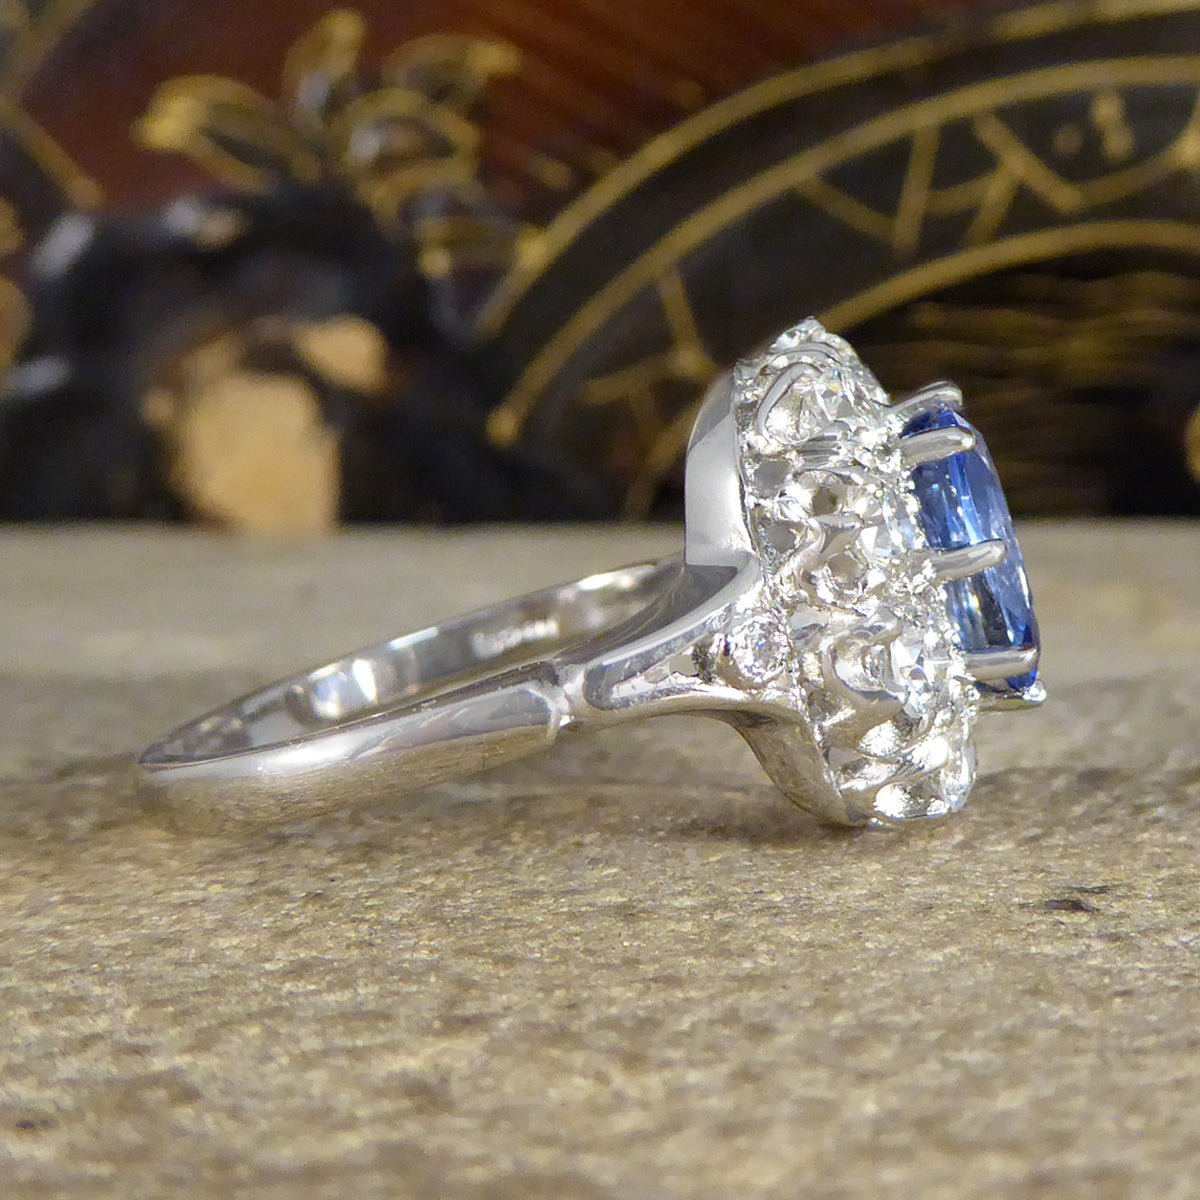 2.04ct Sapphire and 1.25ct Diamond Cluster Ring in 18ct White Gold and Platinum